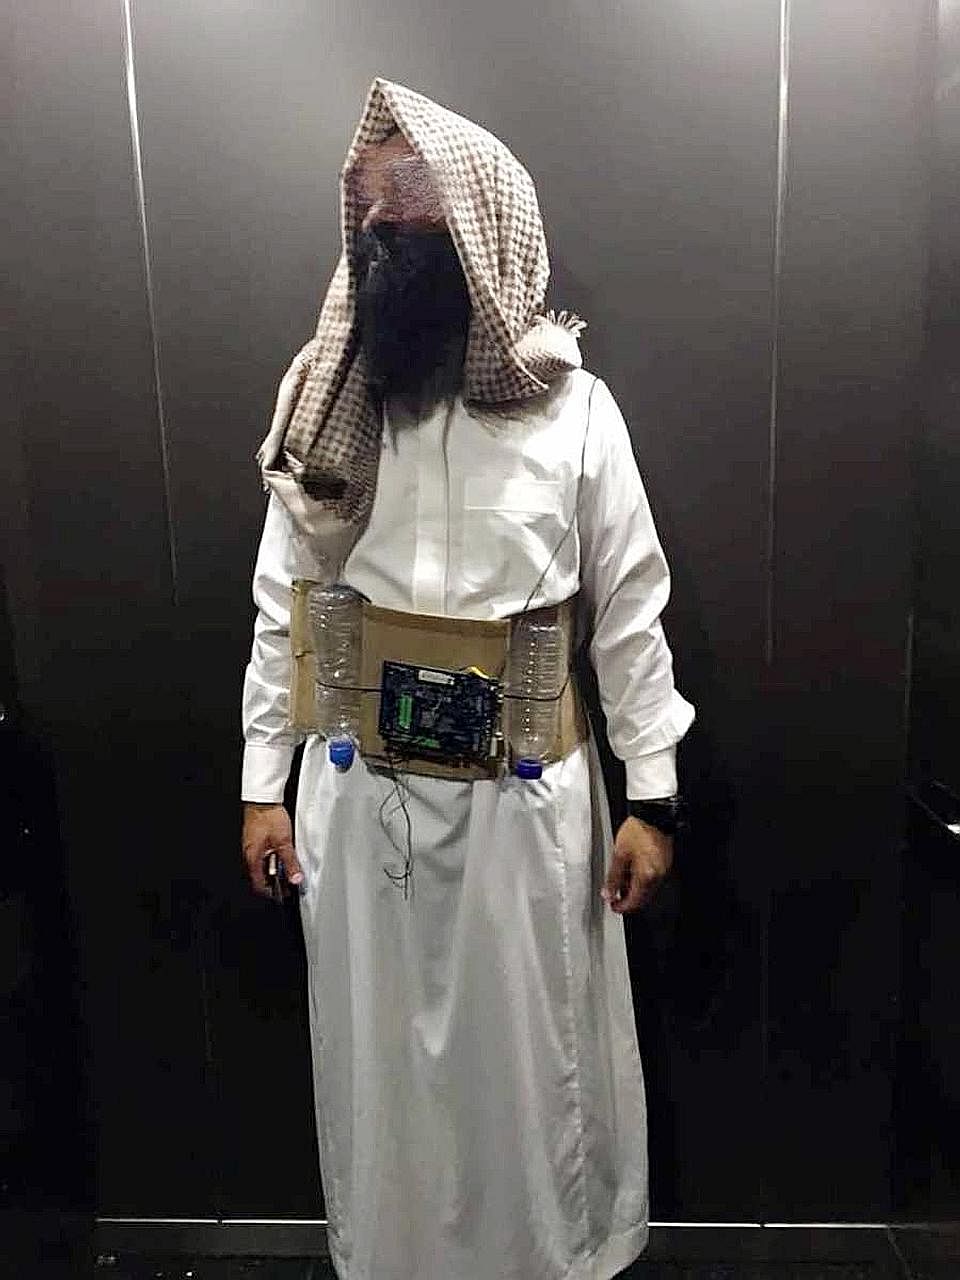 The man, dressed in his costume, was seen in a lift in a Petaling Jaya building.